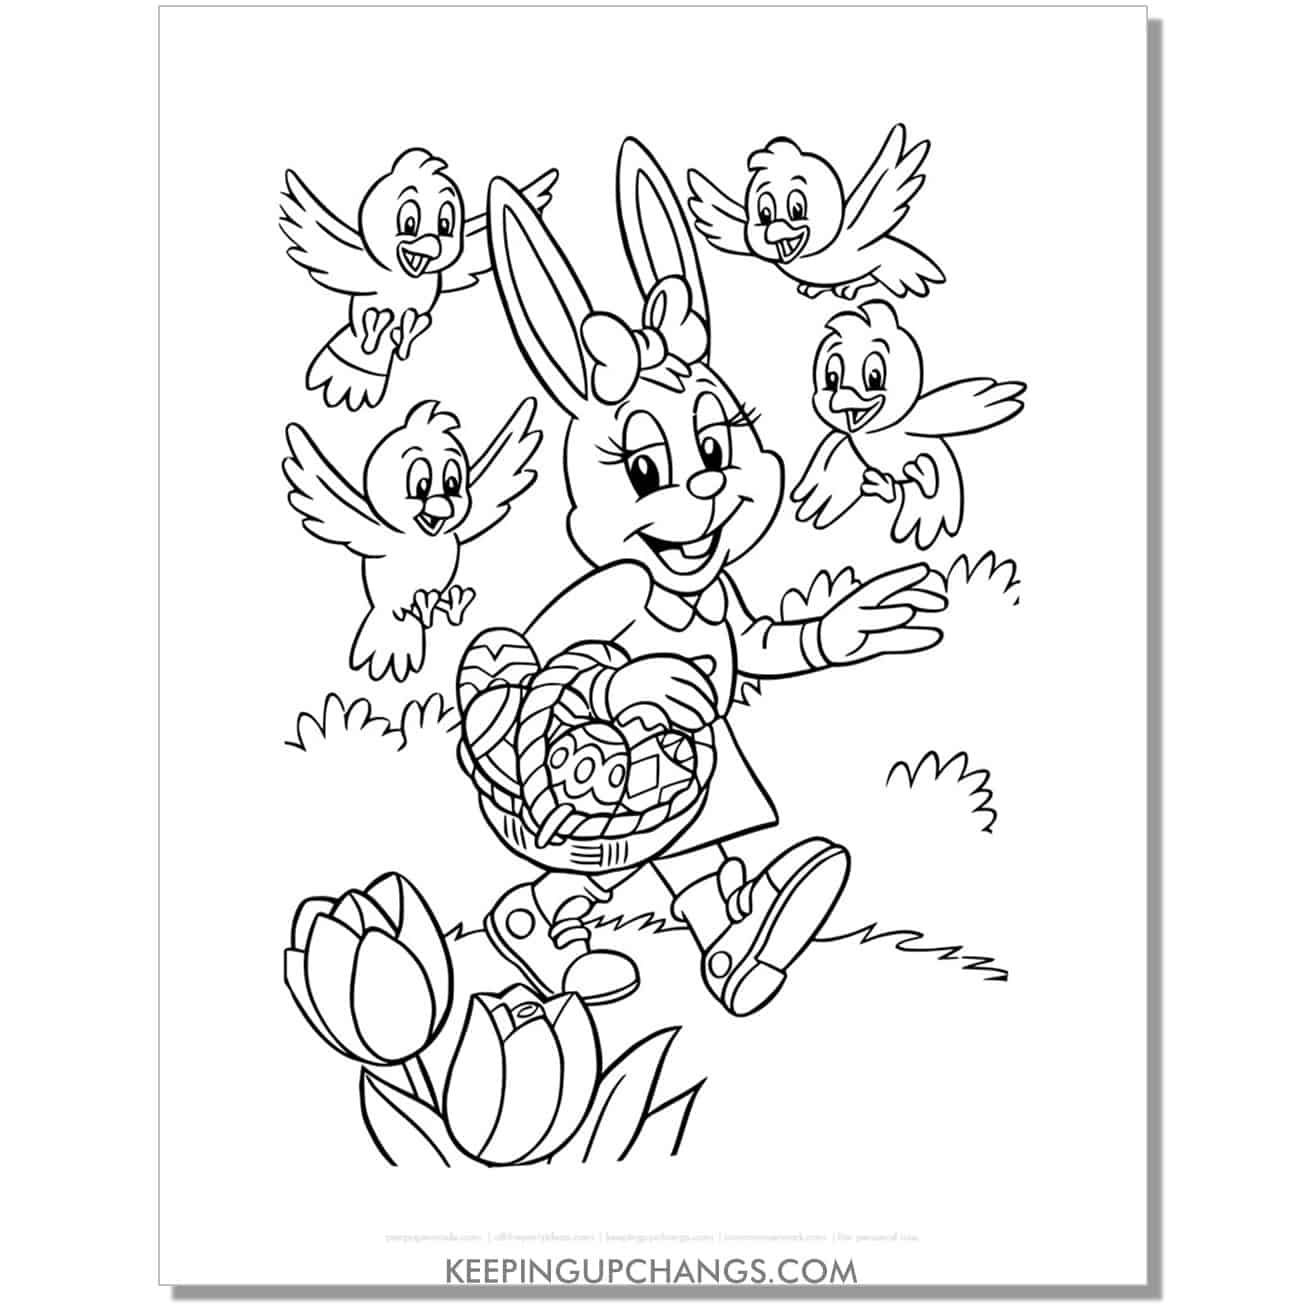 girl easter bunny on egg hunt coloring page, sheet.